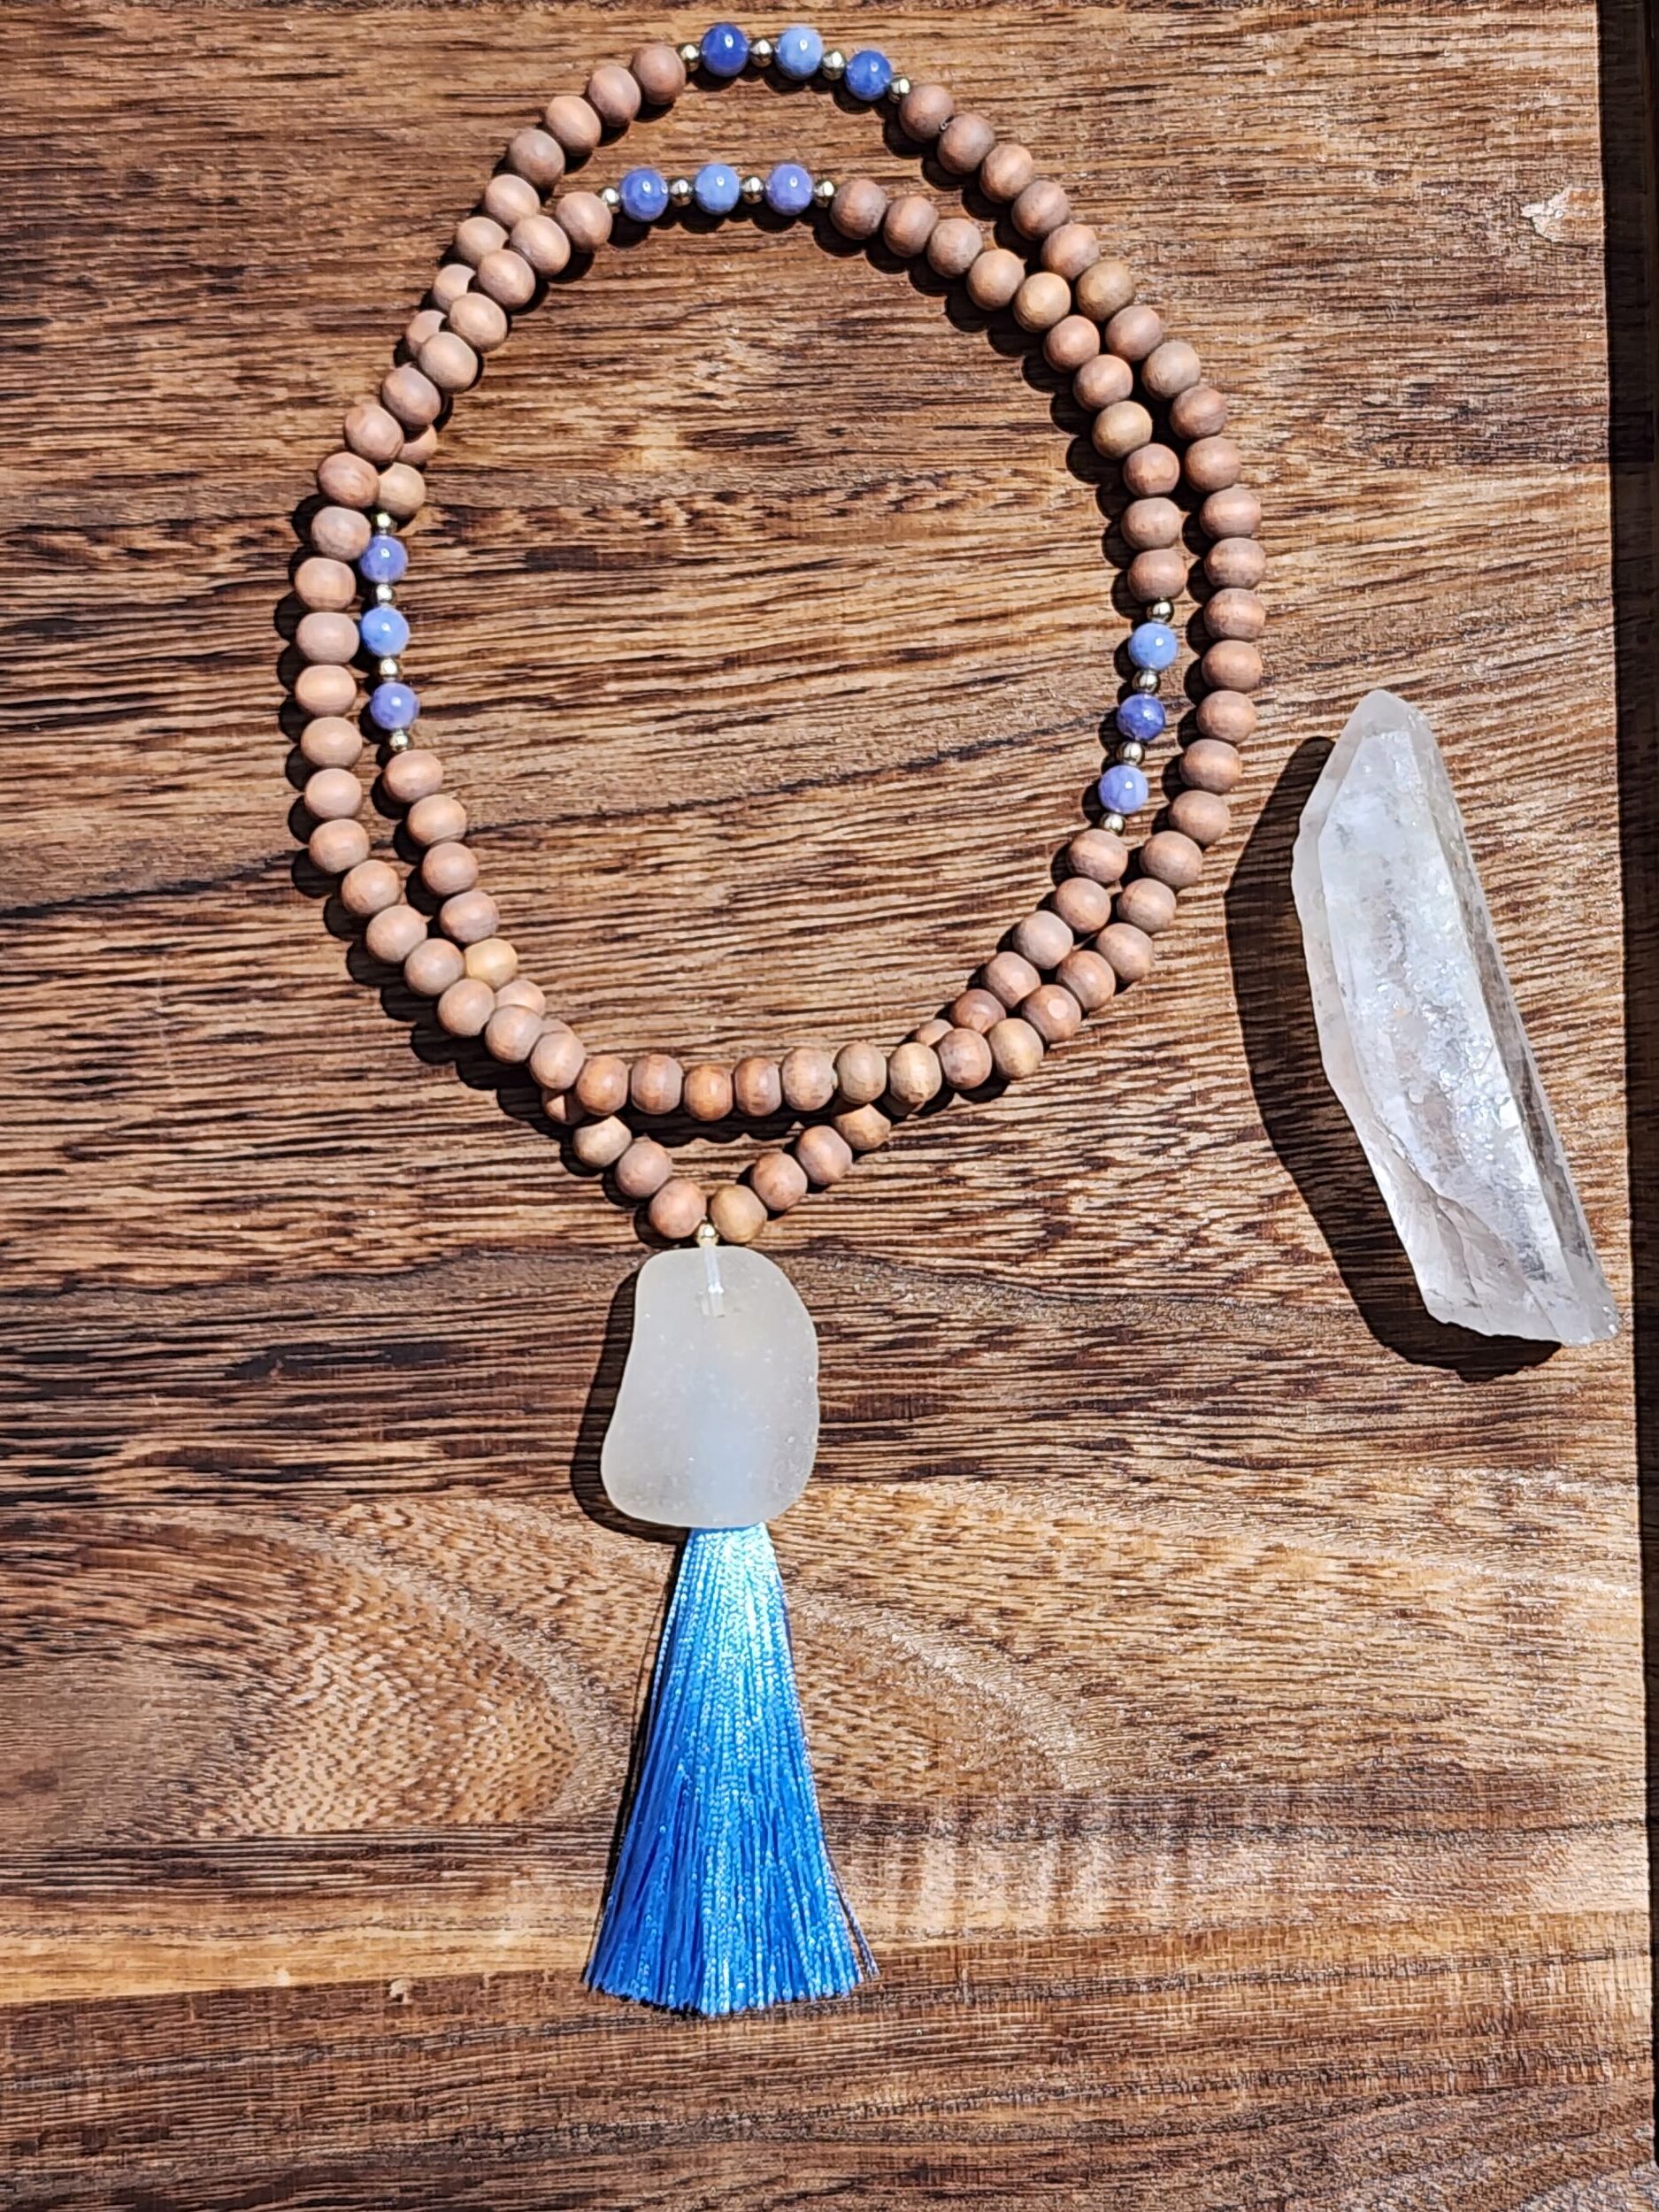 Blue Lace Agate Mala featuring weathered wood, local clear sea glass, and blue tassel